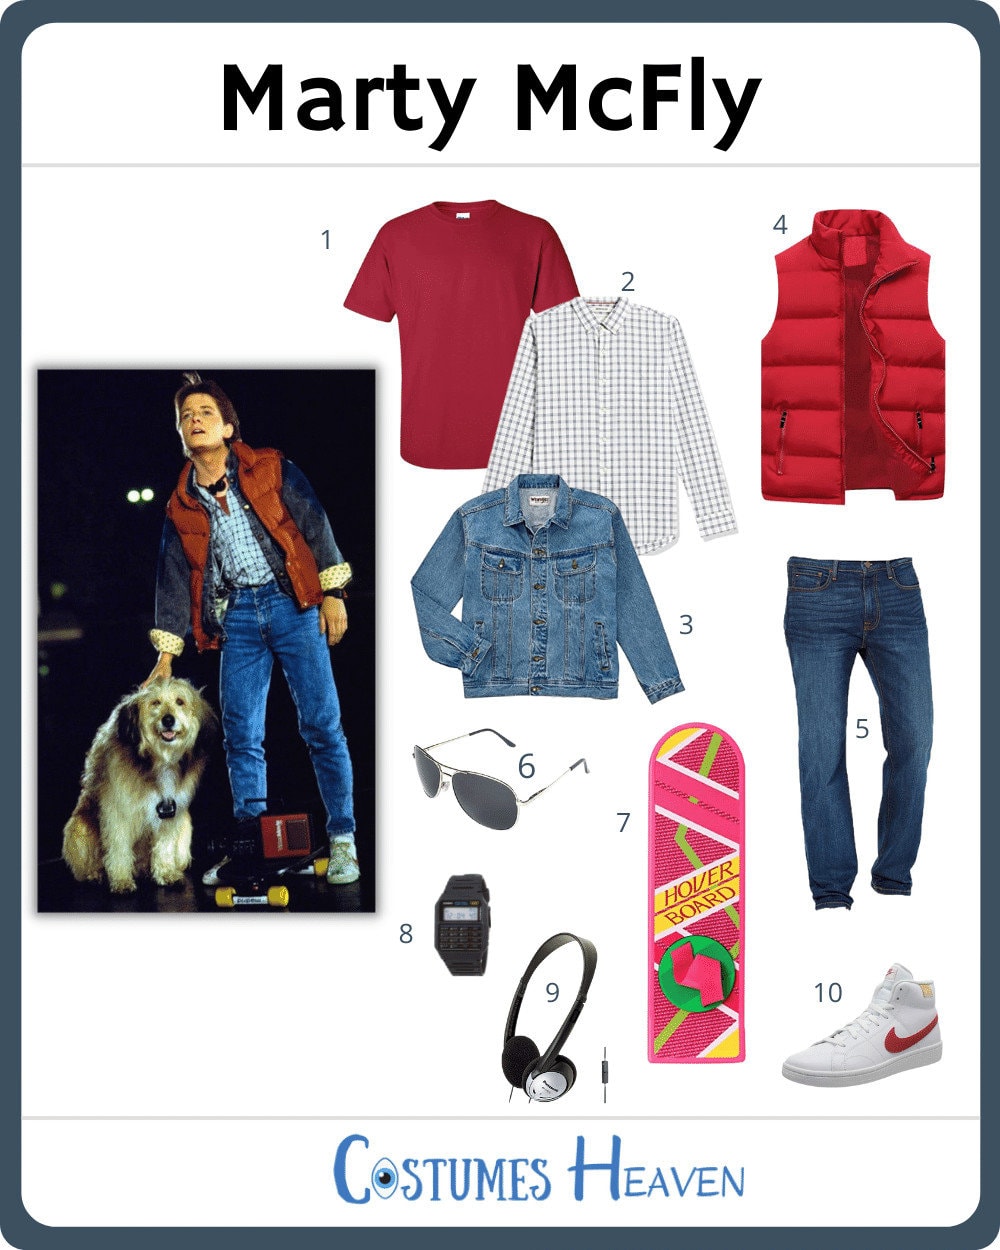 Marty McFly costume